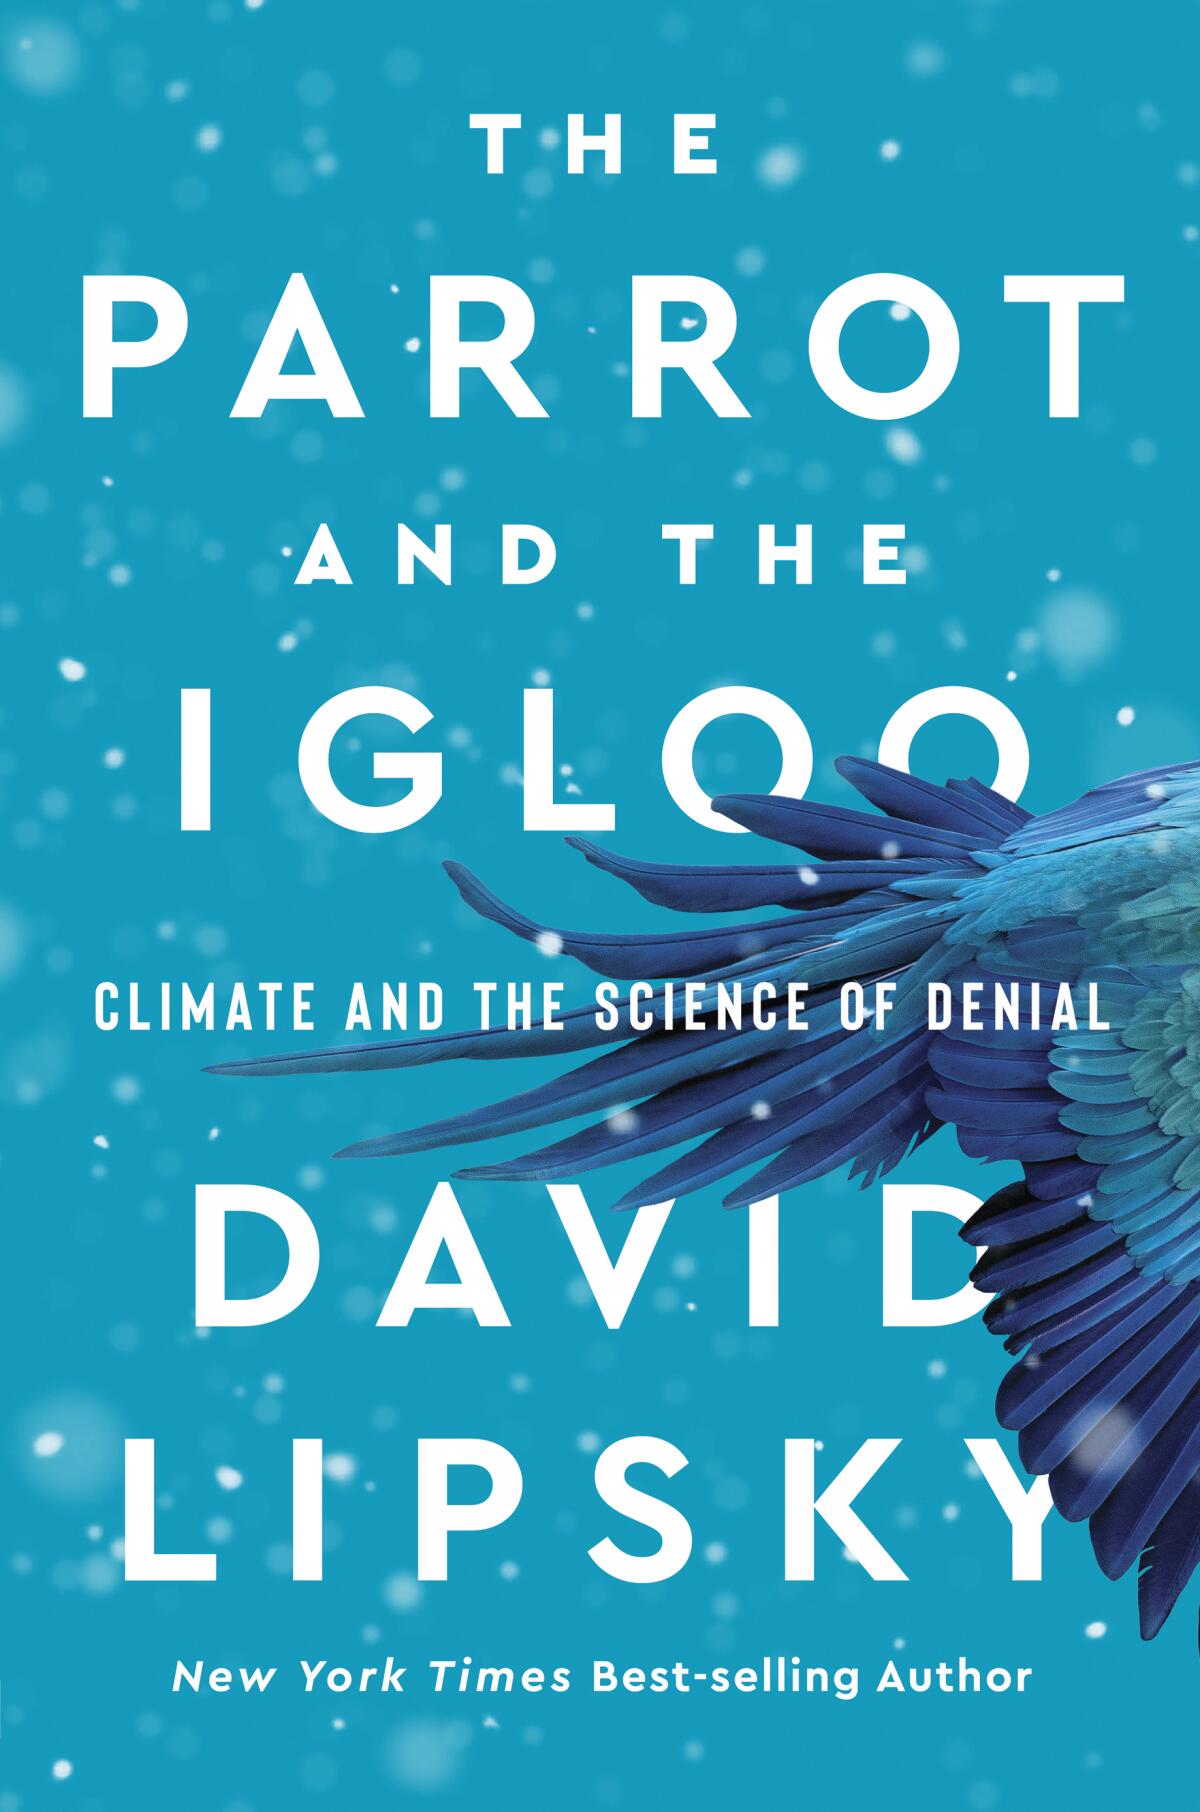 "The Parrot and the Igloo," by David Lipsky